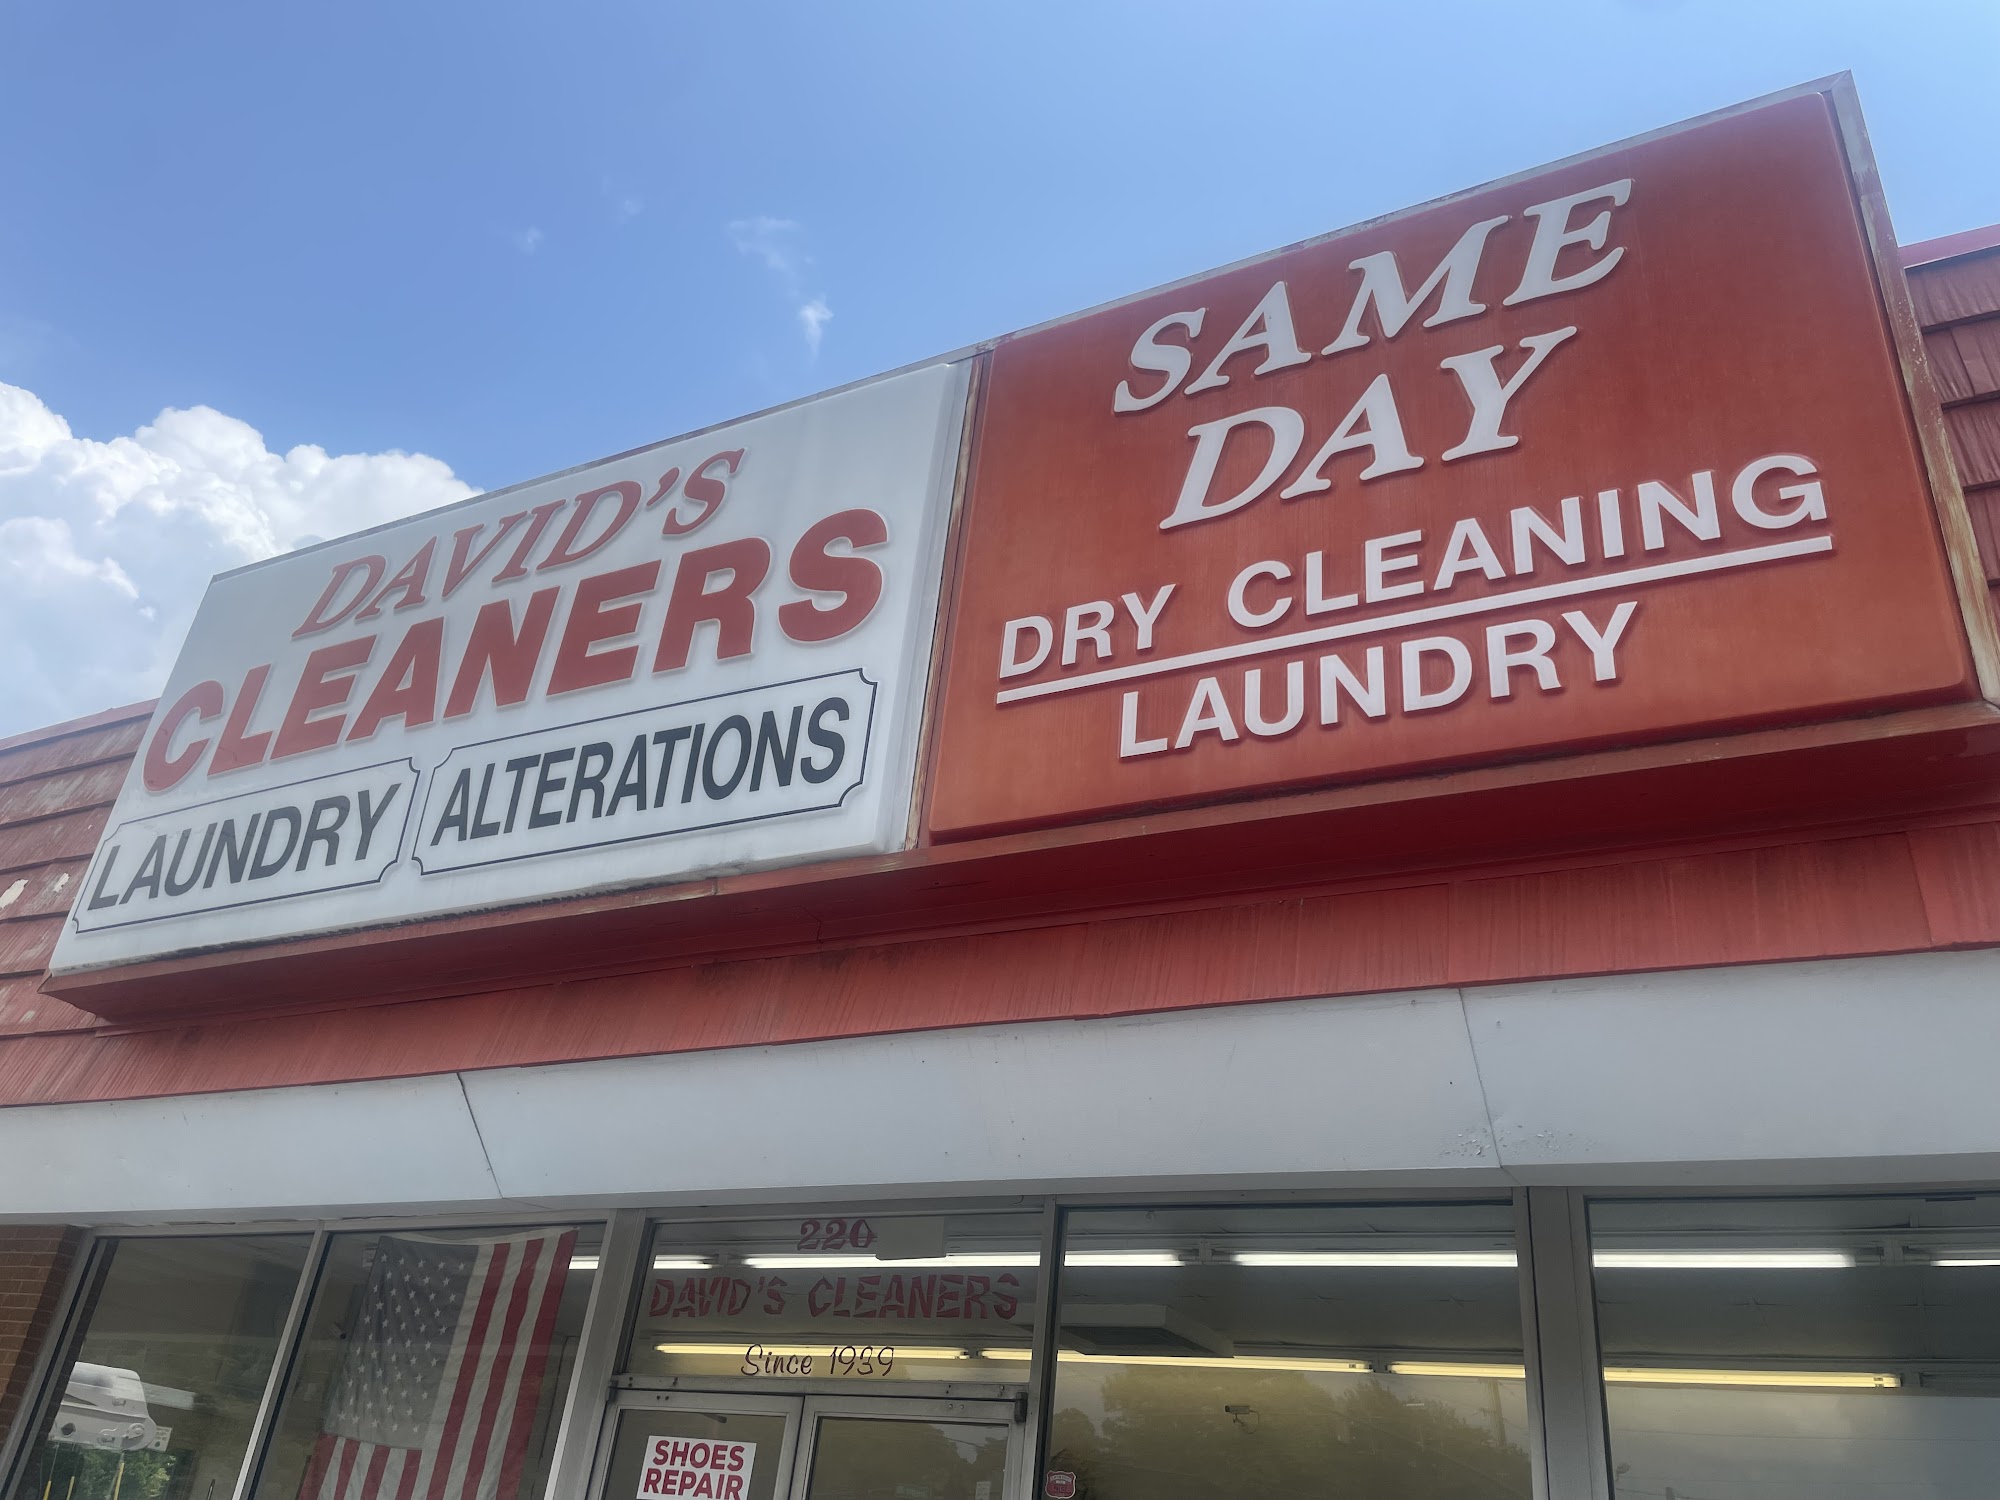 David's Cleaners & Laundry